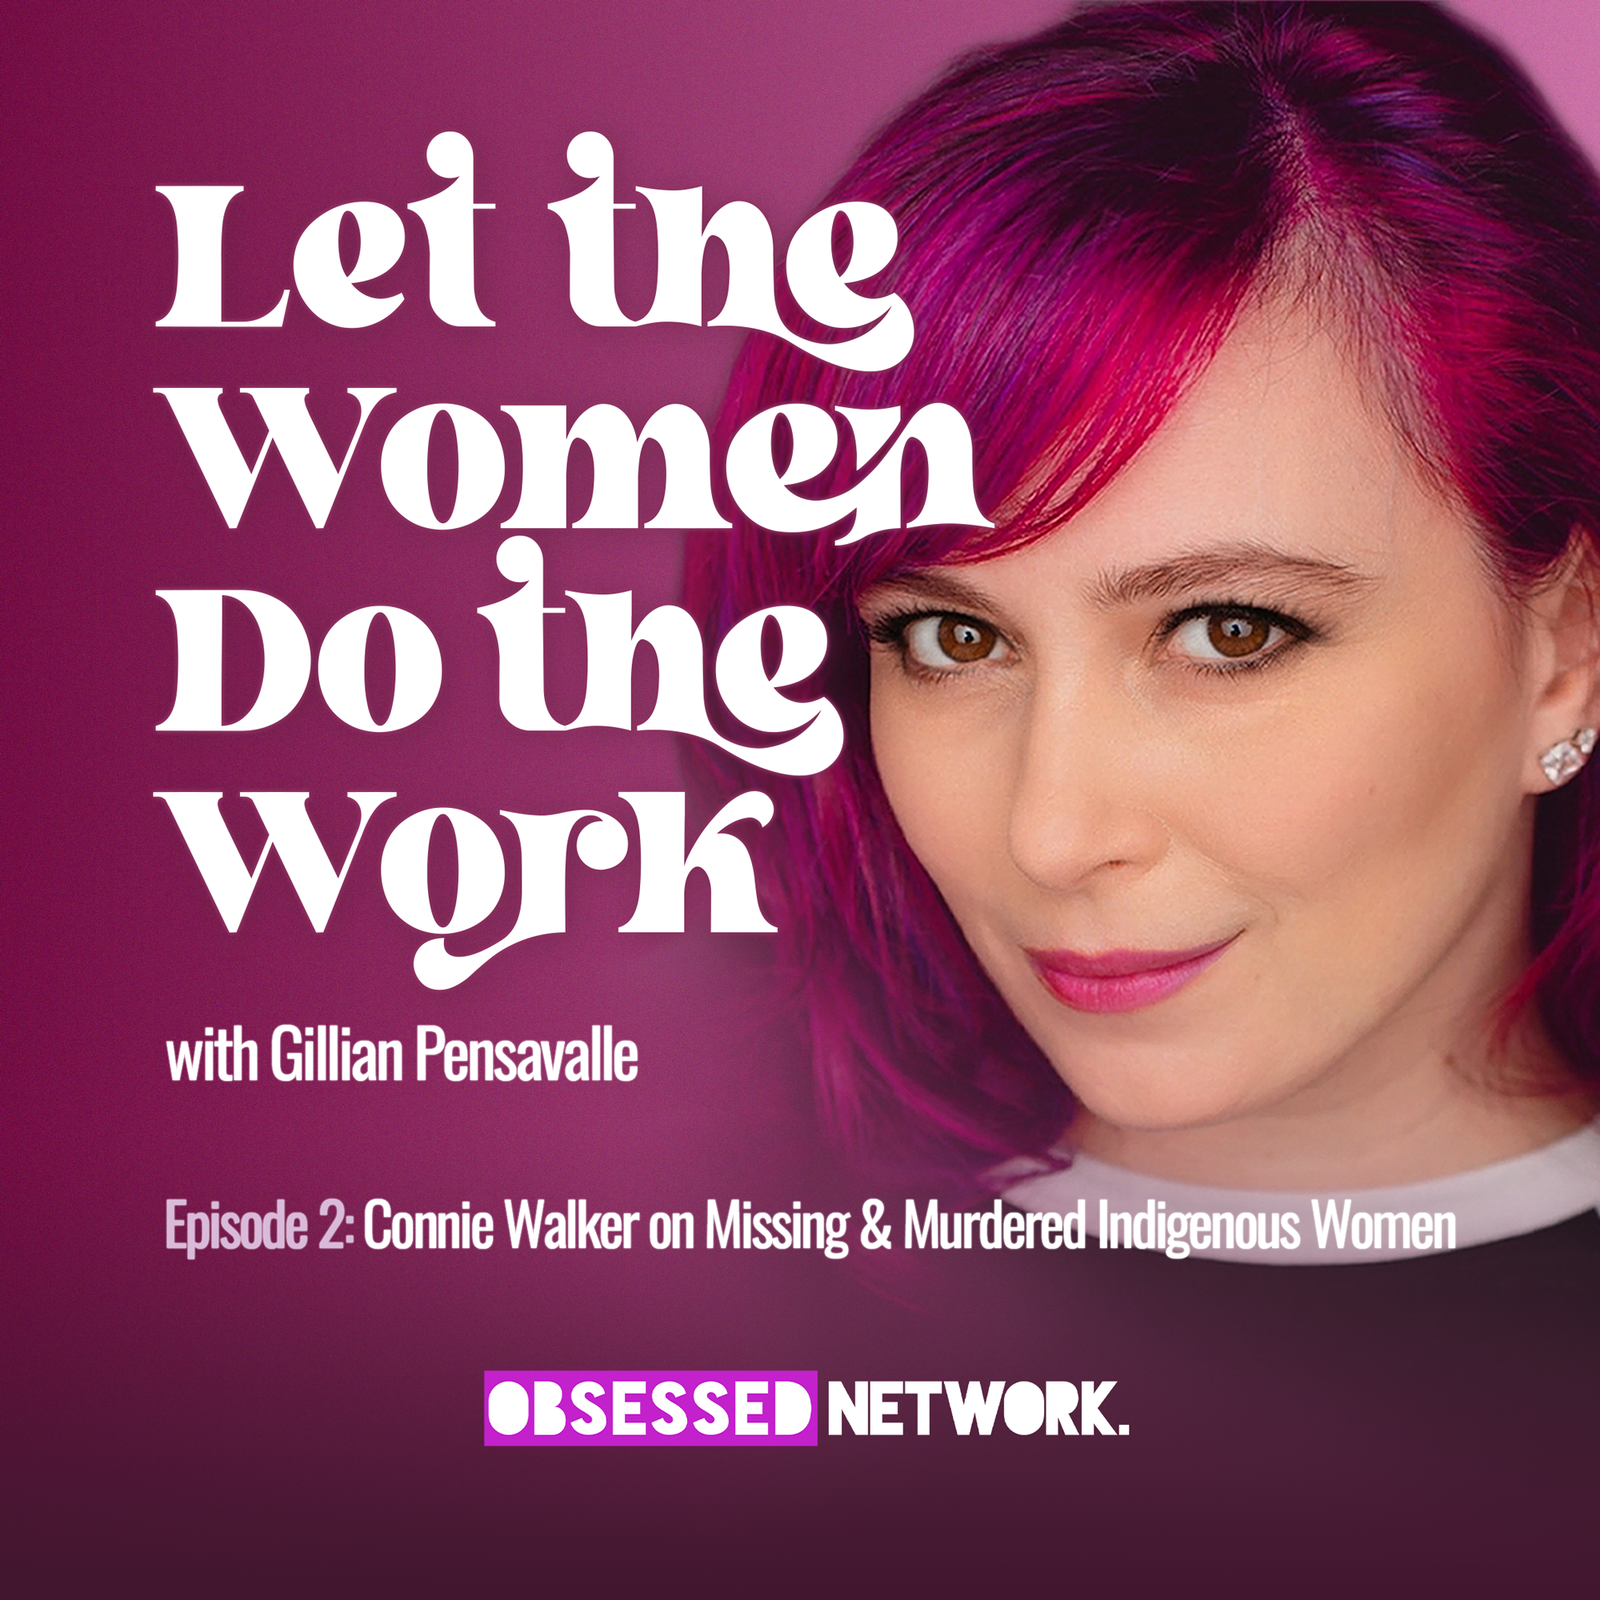 Let The Women: Connie Walker on Missing & Murdered Indigenous Women by Obsessed Network